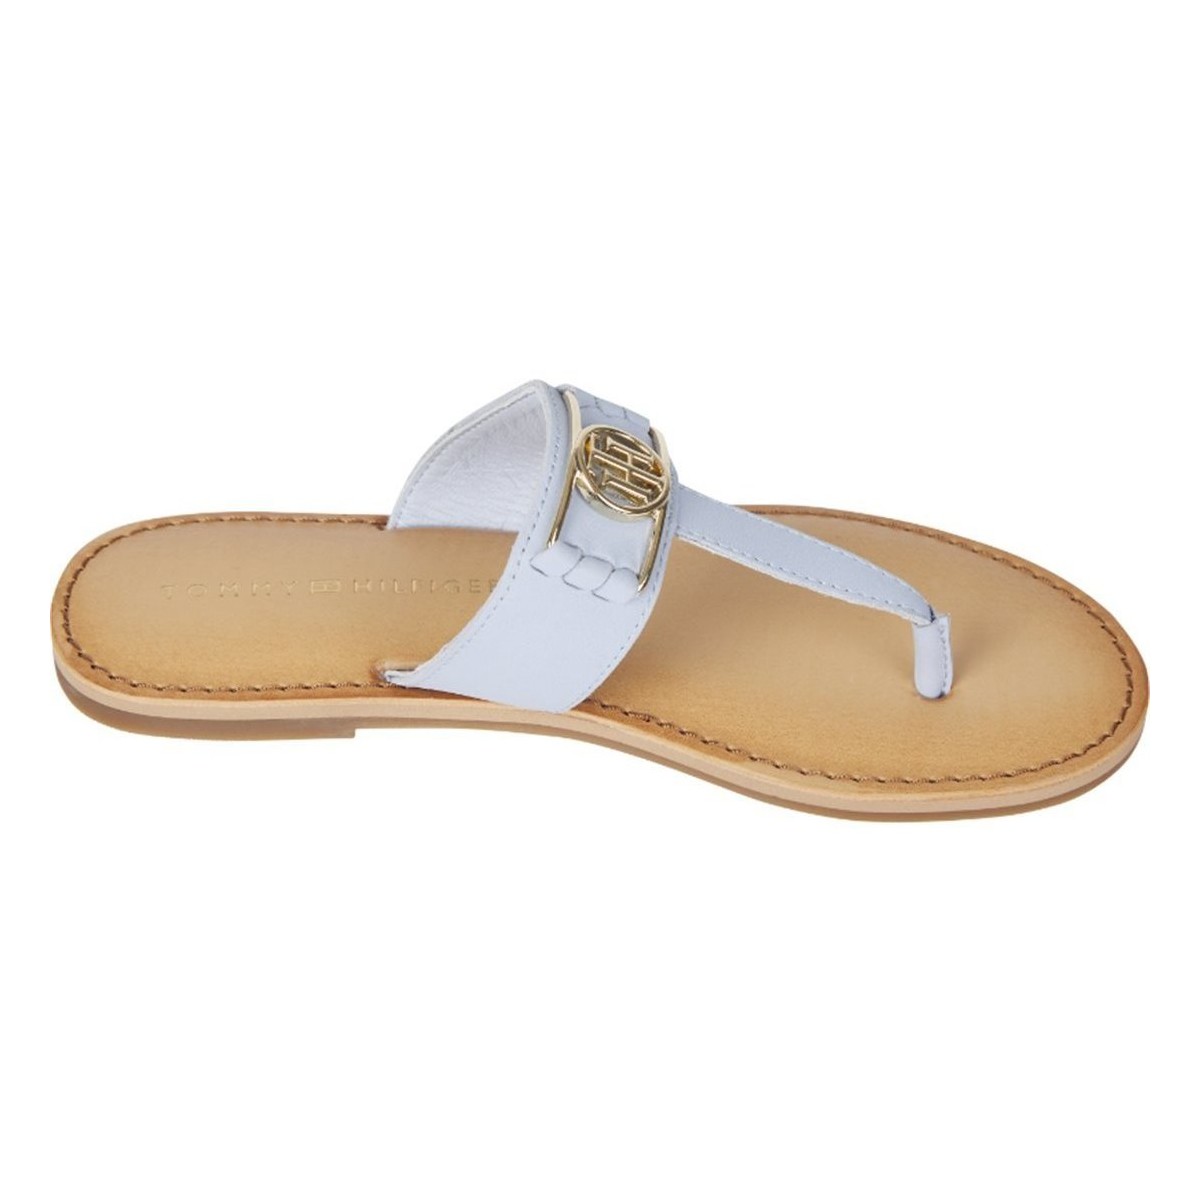 Sapatos Mulher Chinelos Tommy Hilfiger TH HARDWARE FLAT LEATHER MULE Branco